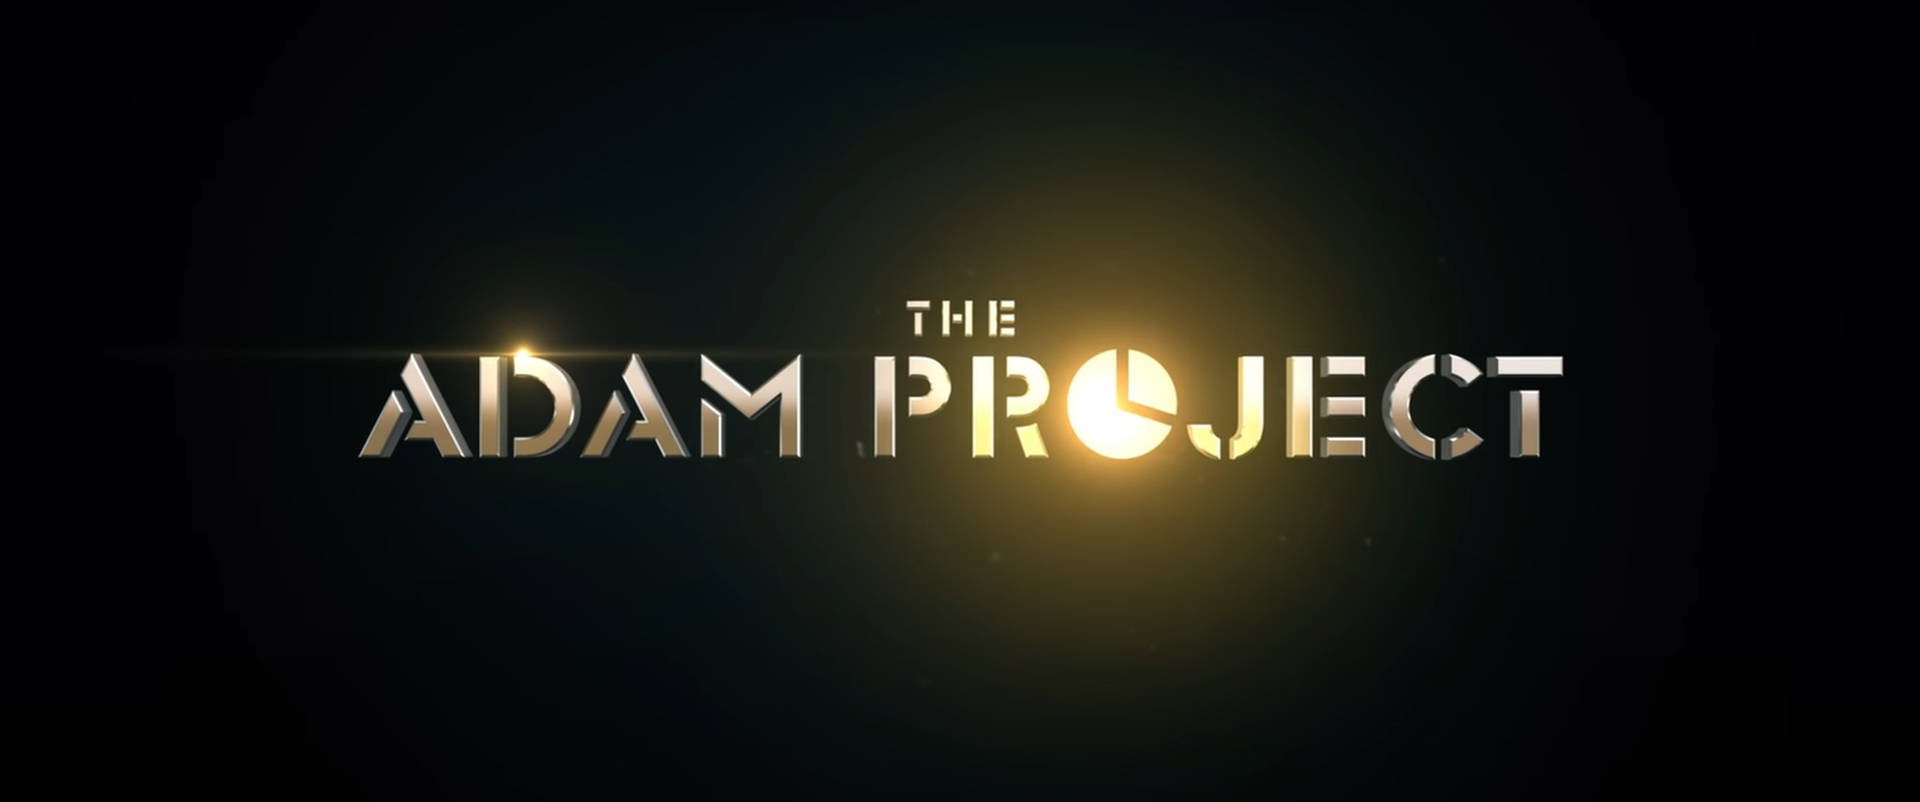 The Adam Project Background Wallpaper